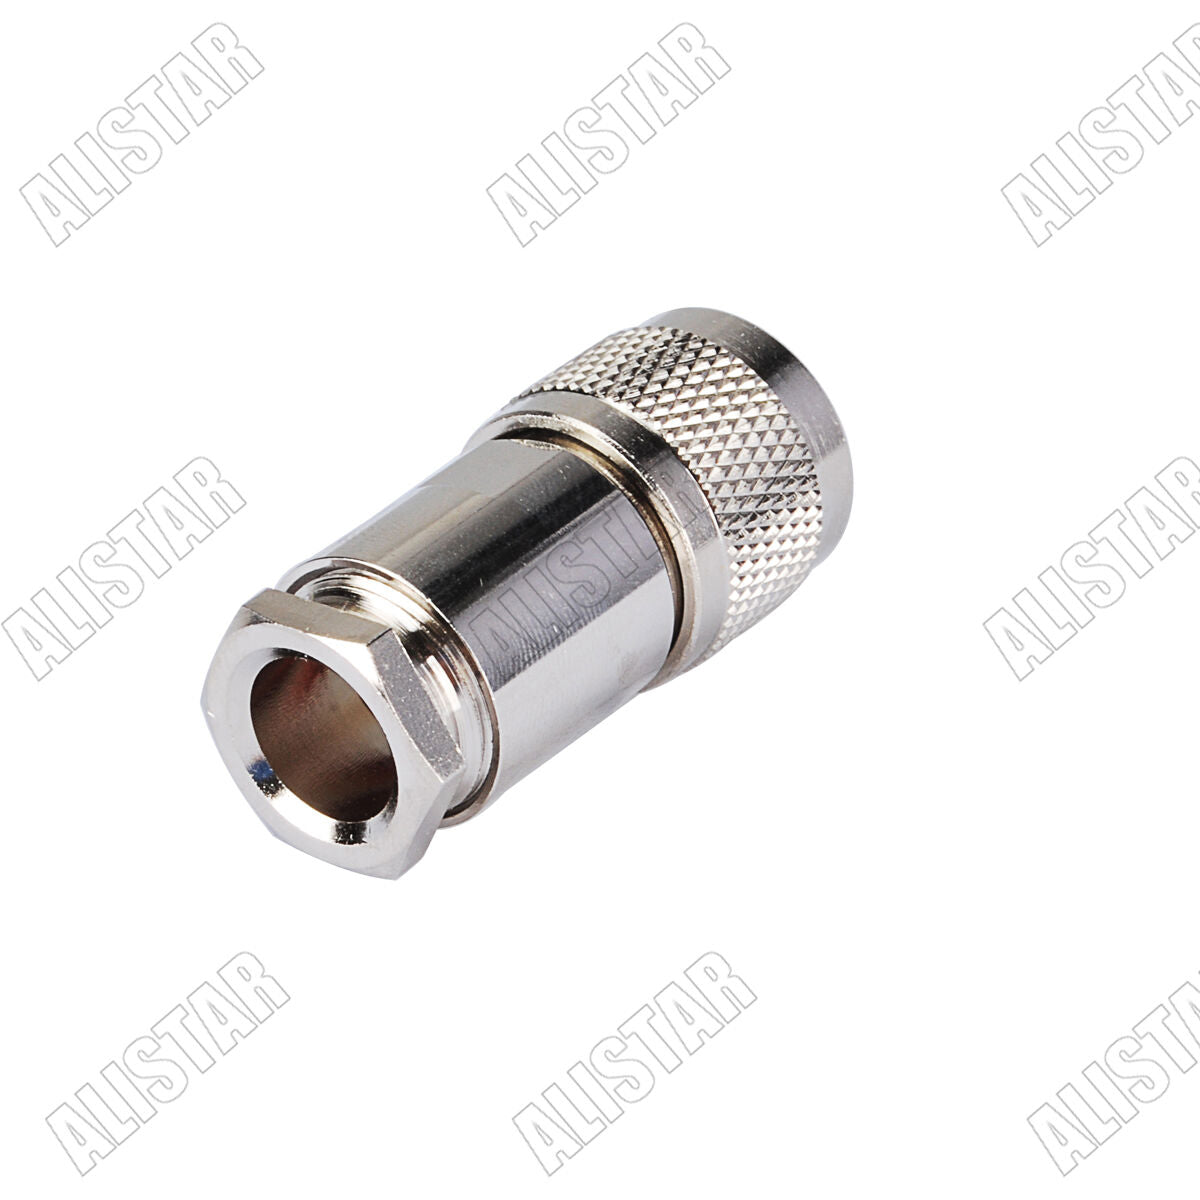 PL259 UHF Male Clamp Connector for LMR400 RG8 RG213 RG214 Coaxial Cable